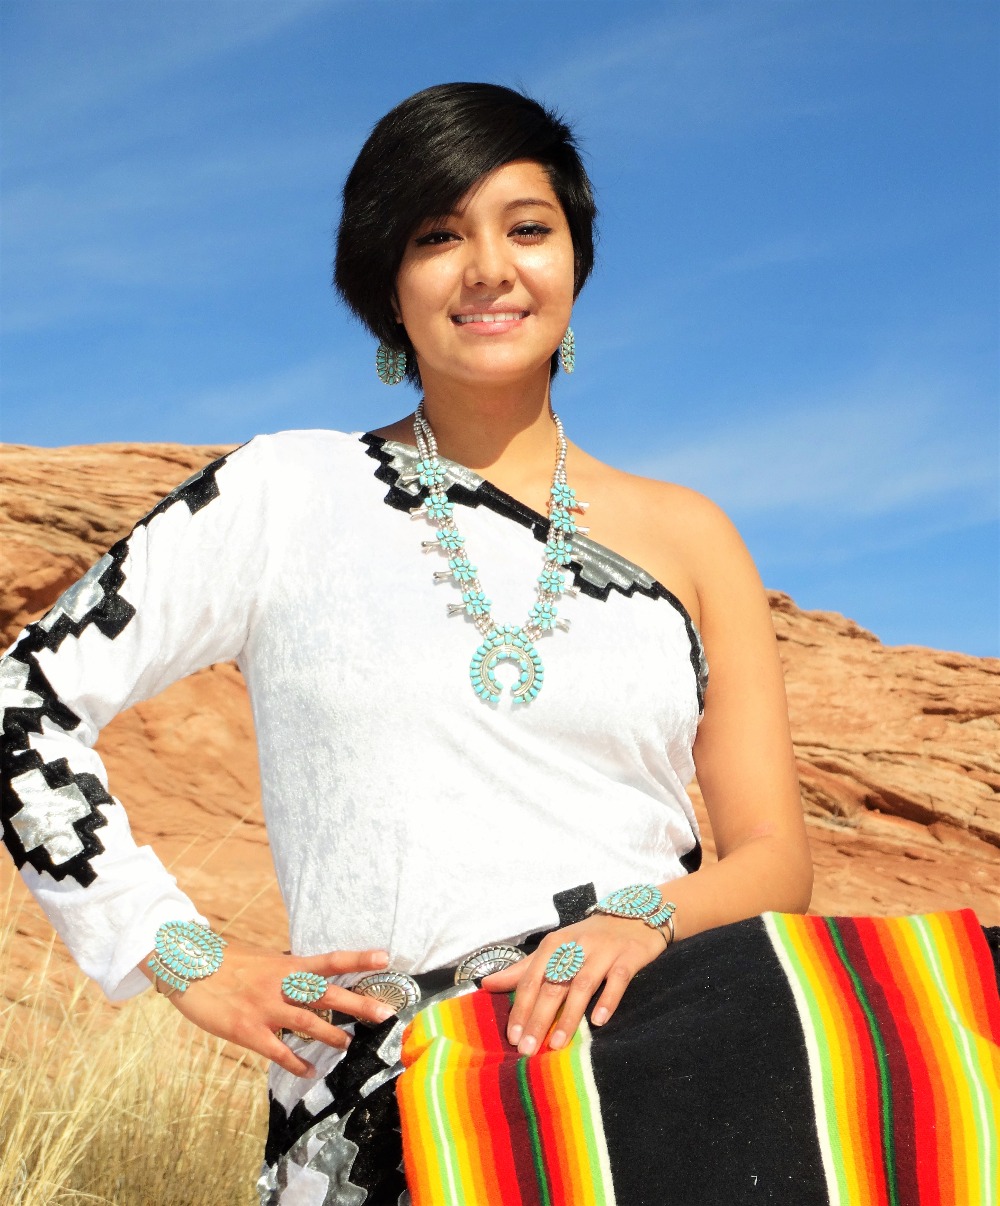 I am proud to announce, I will be representing the Navajo Nation in the 201...